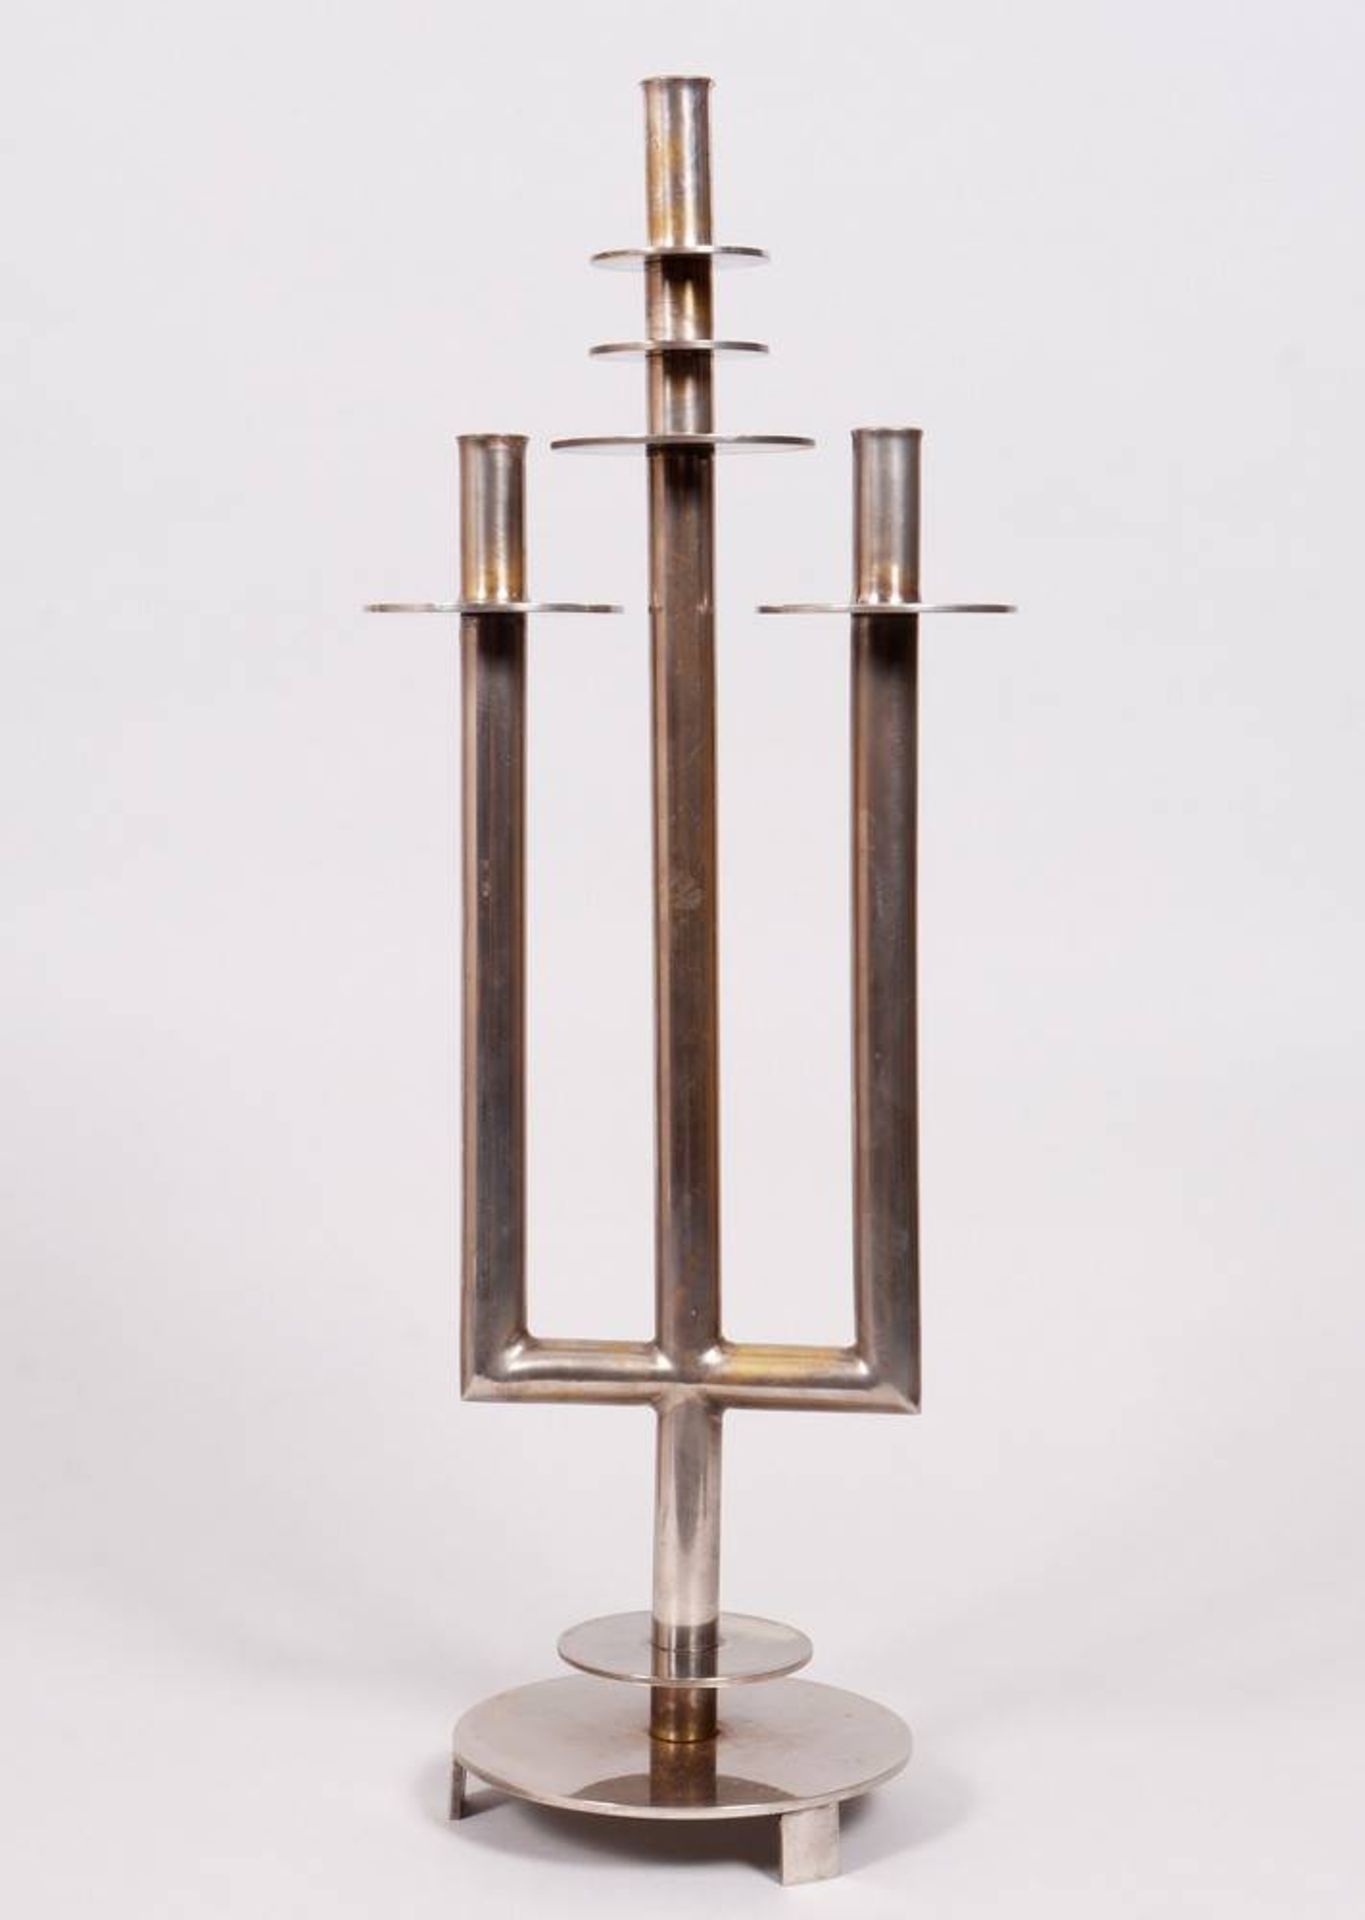 Large candelabra, silver-plated, probably German, 20th C.